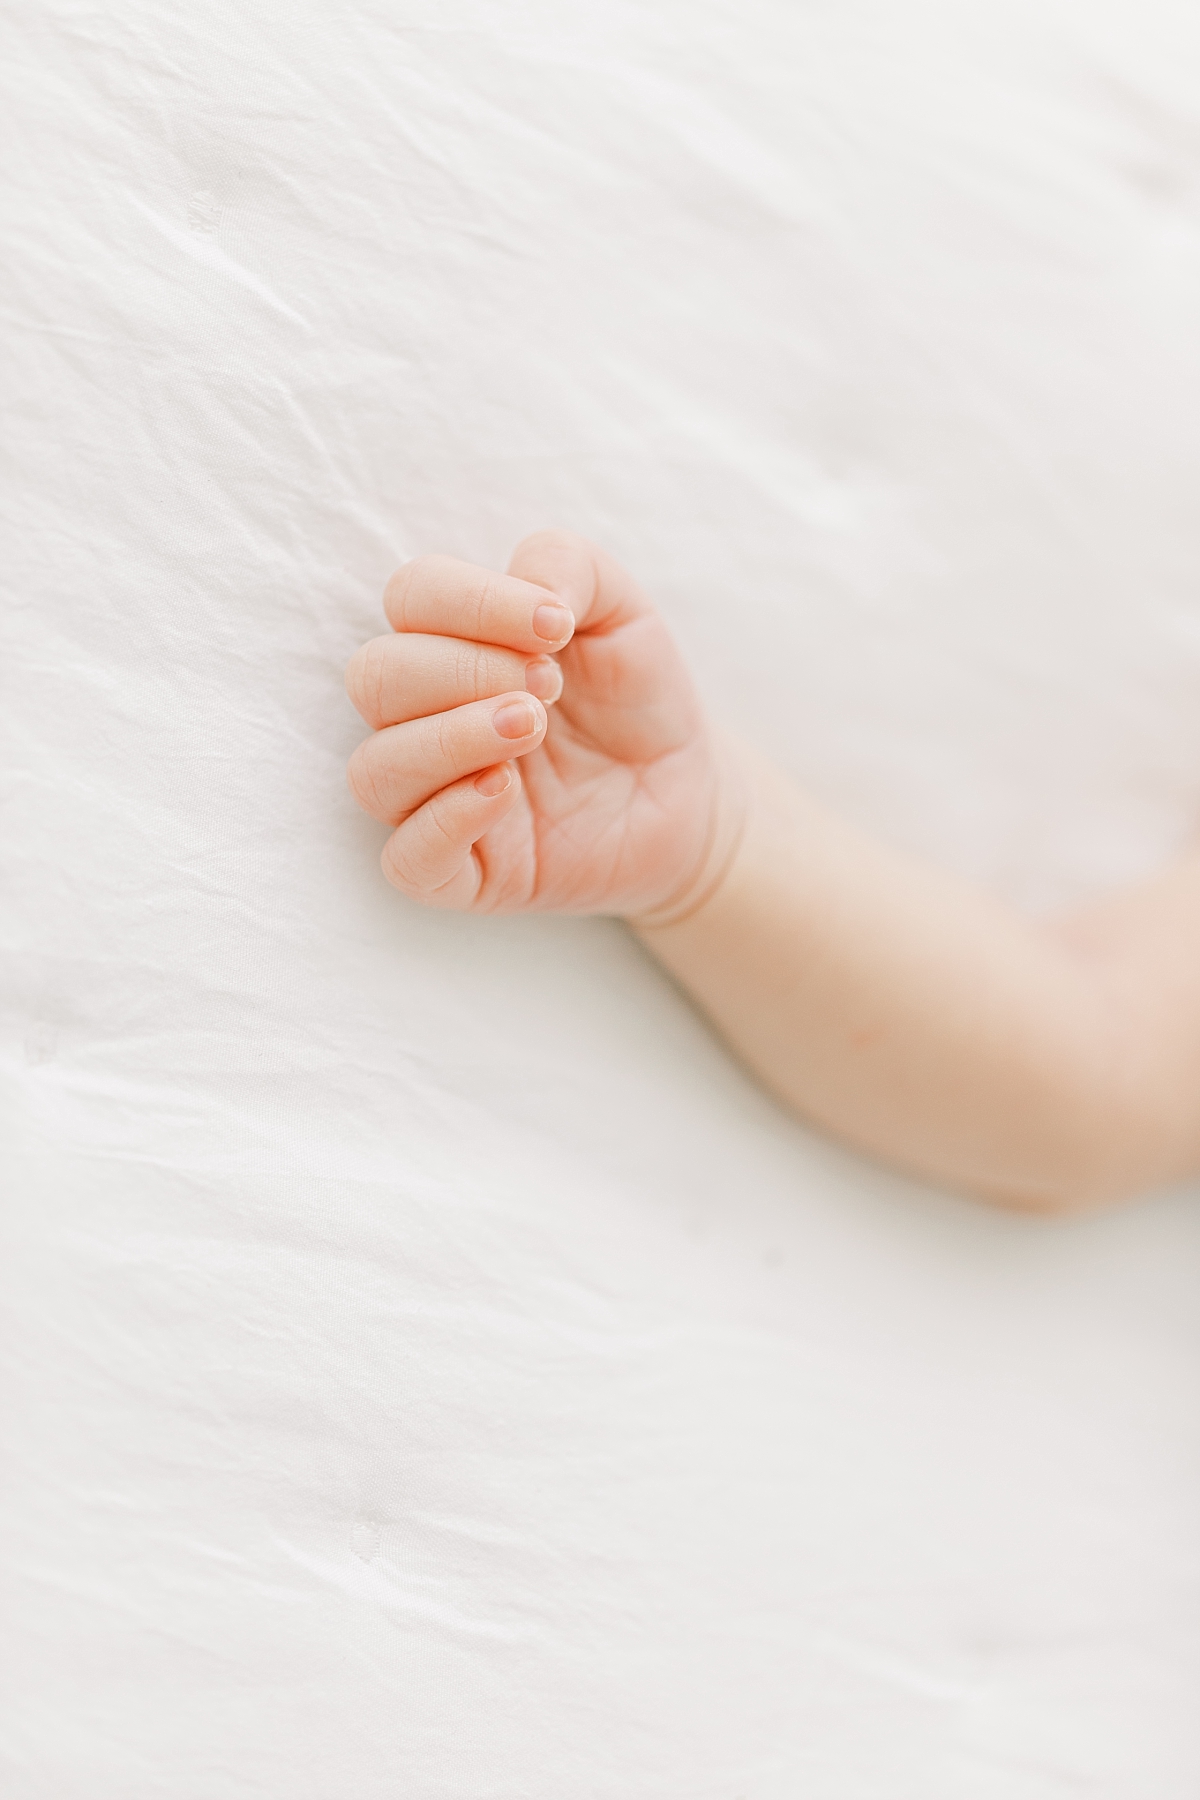 lifestyle newborn session with baby's hand